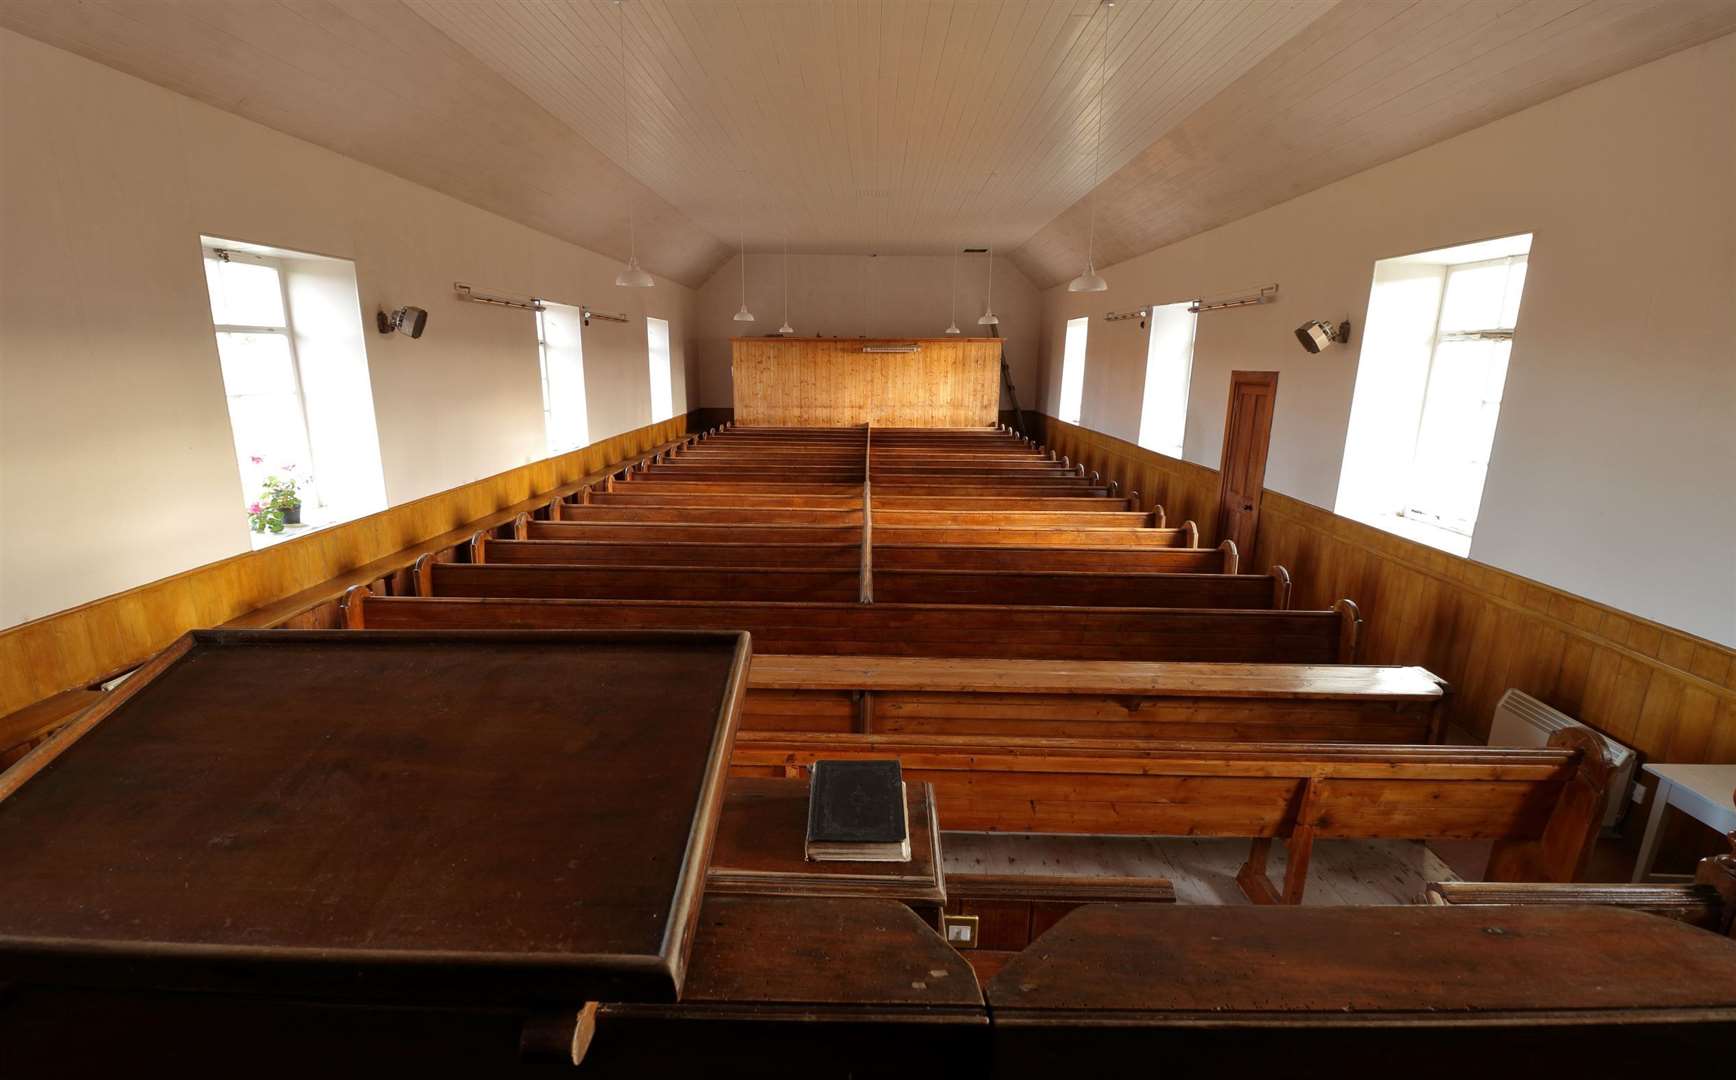 Some of the pews were turned into tables and benches.